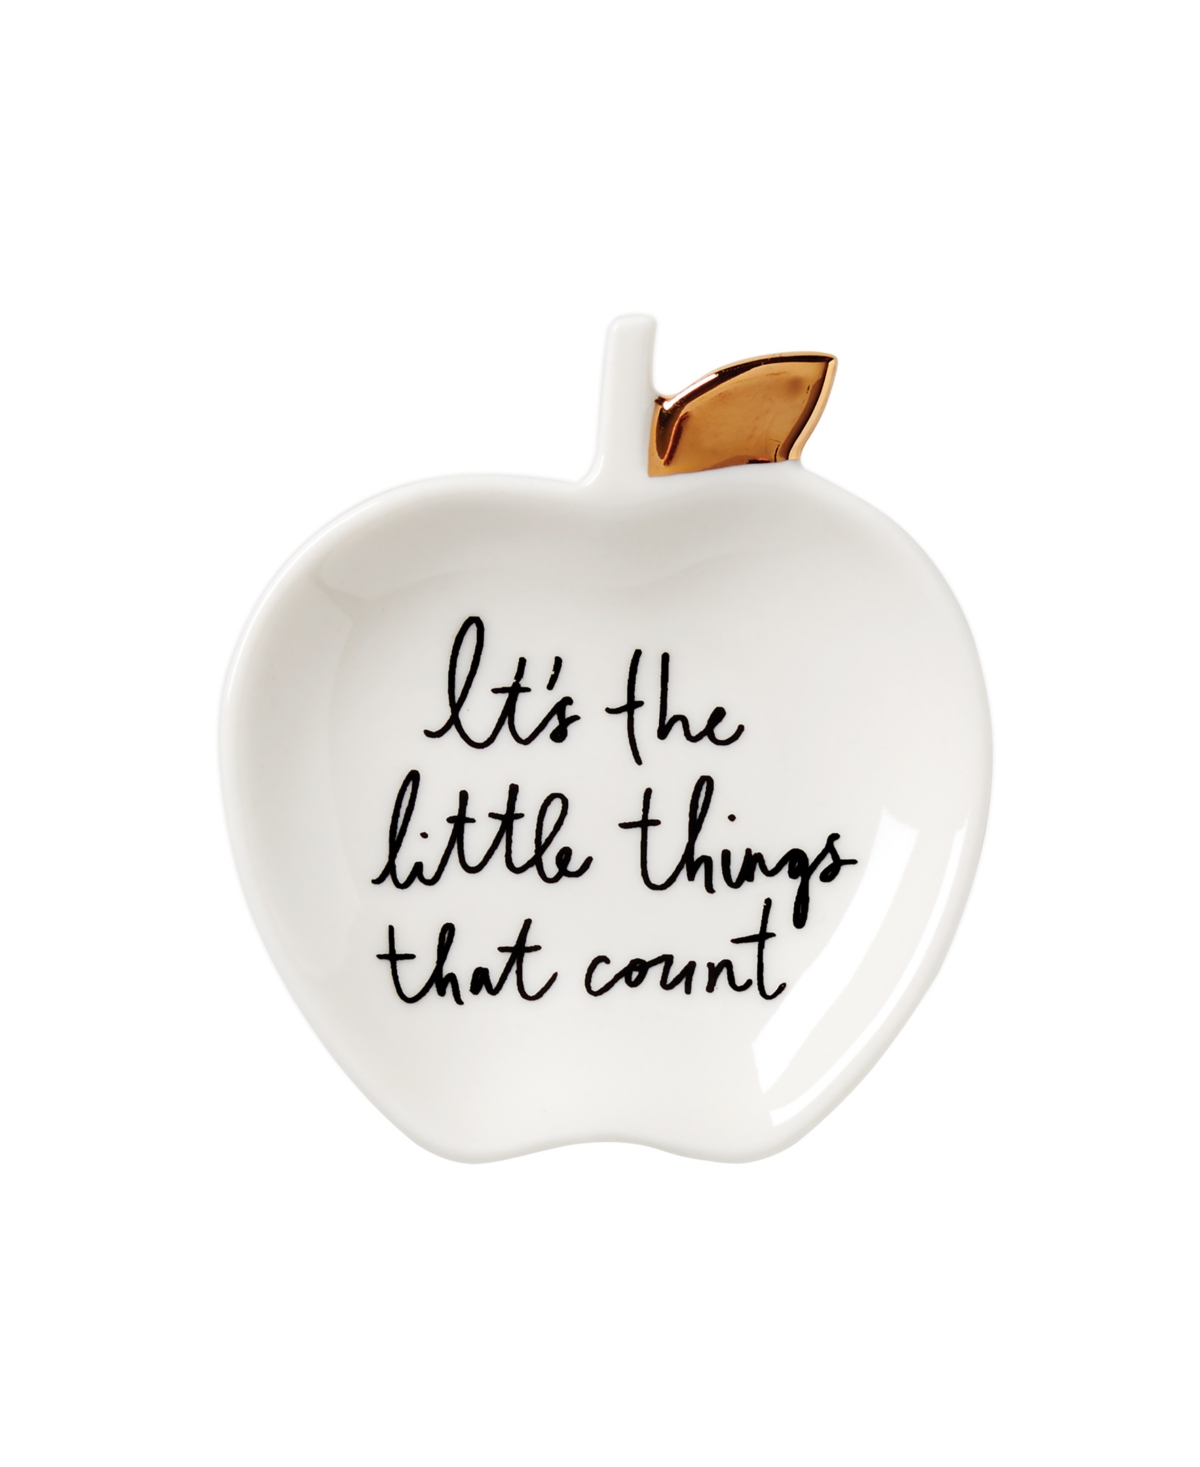 Charmed Life Apple Ring Dish - White